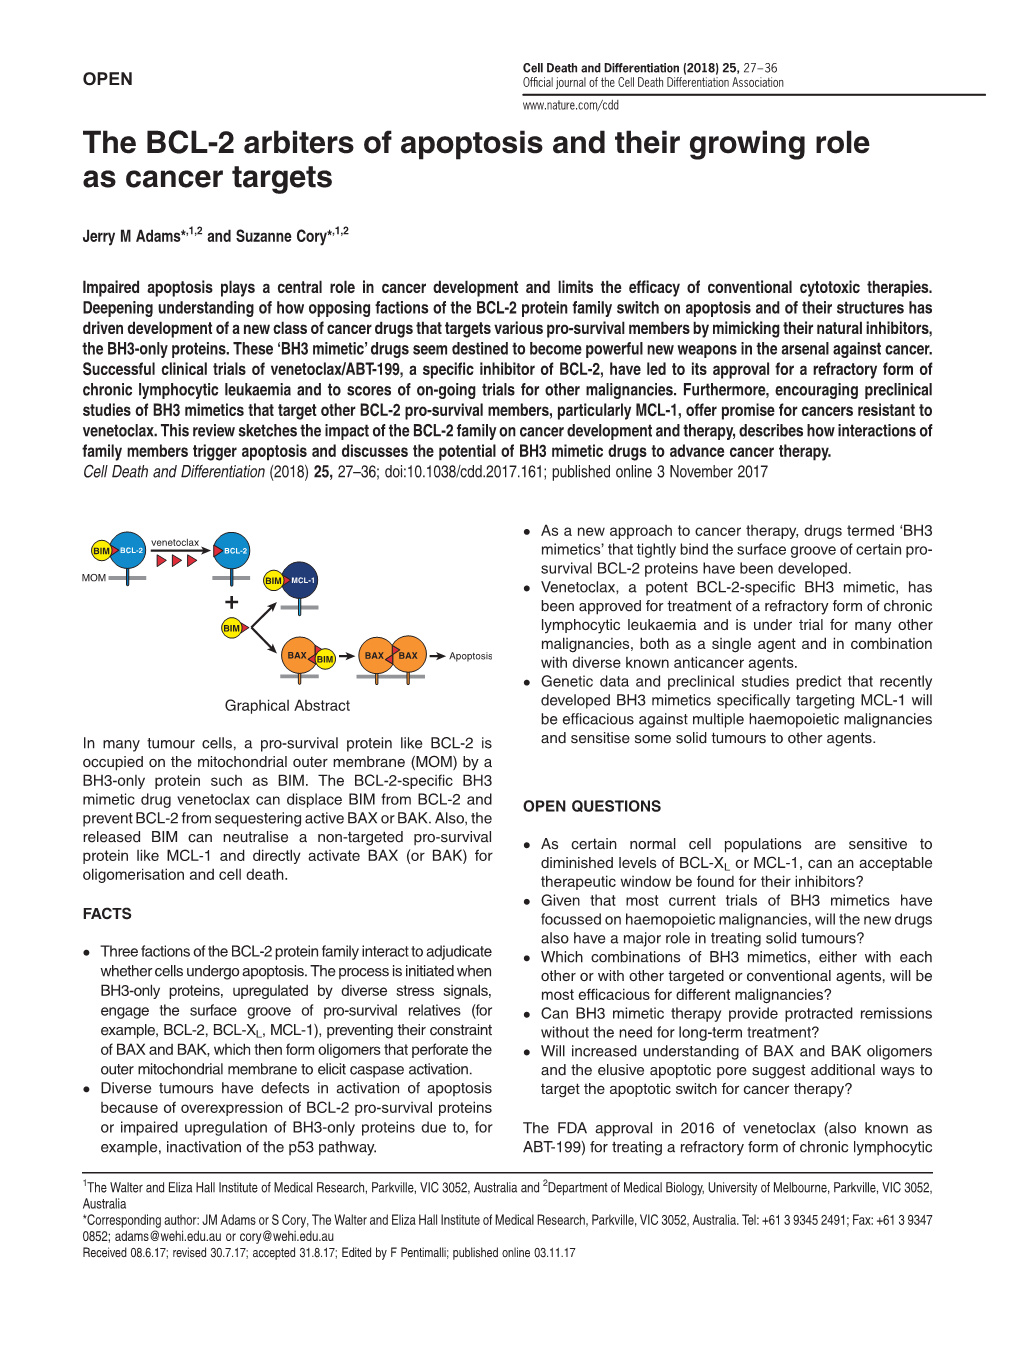 The BCL-2 Arbiters of Apoptosis and Their Growing Role As Cancer Targets